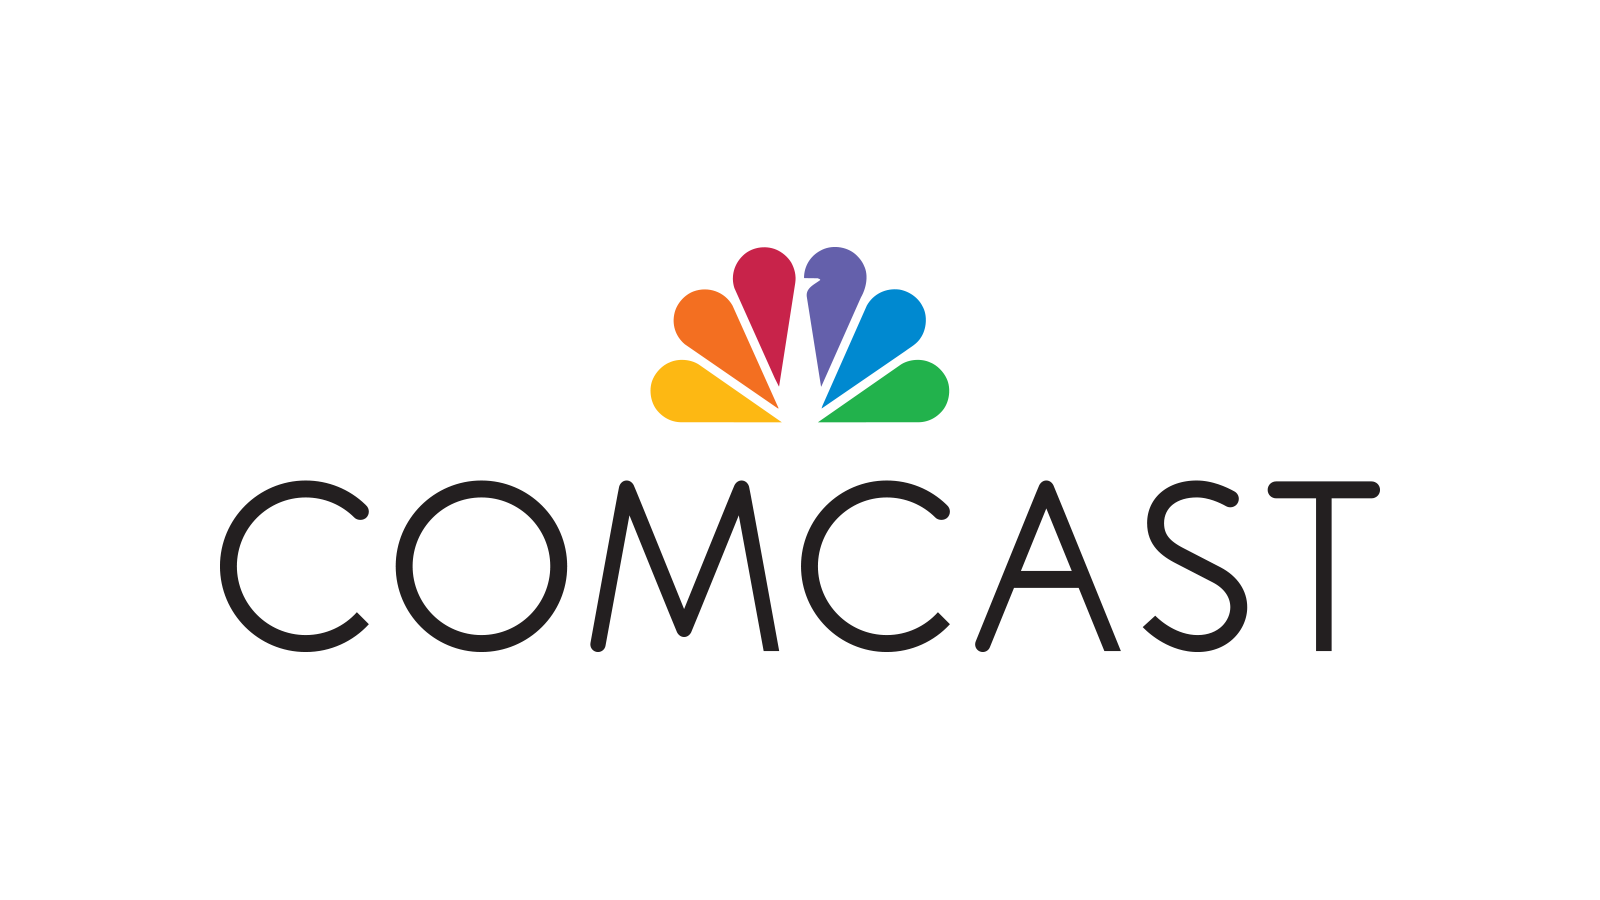 Comcast NBCUniversal Named a Best Workplace for Women